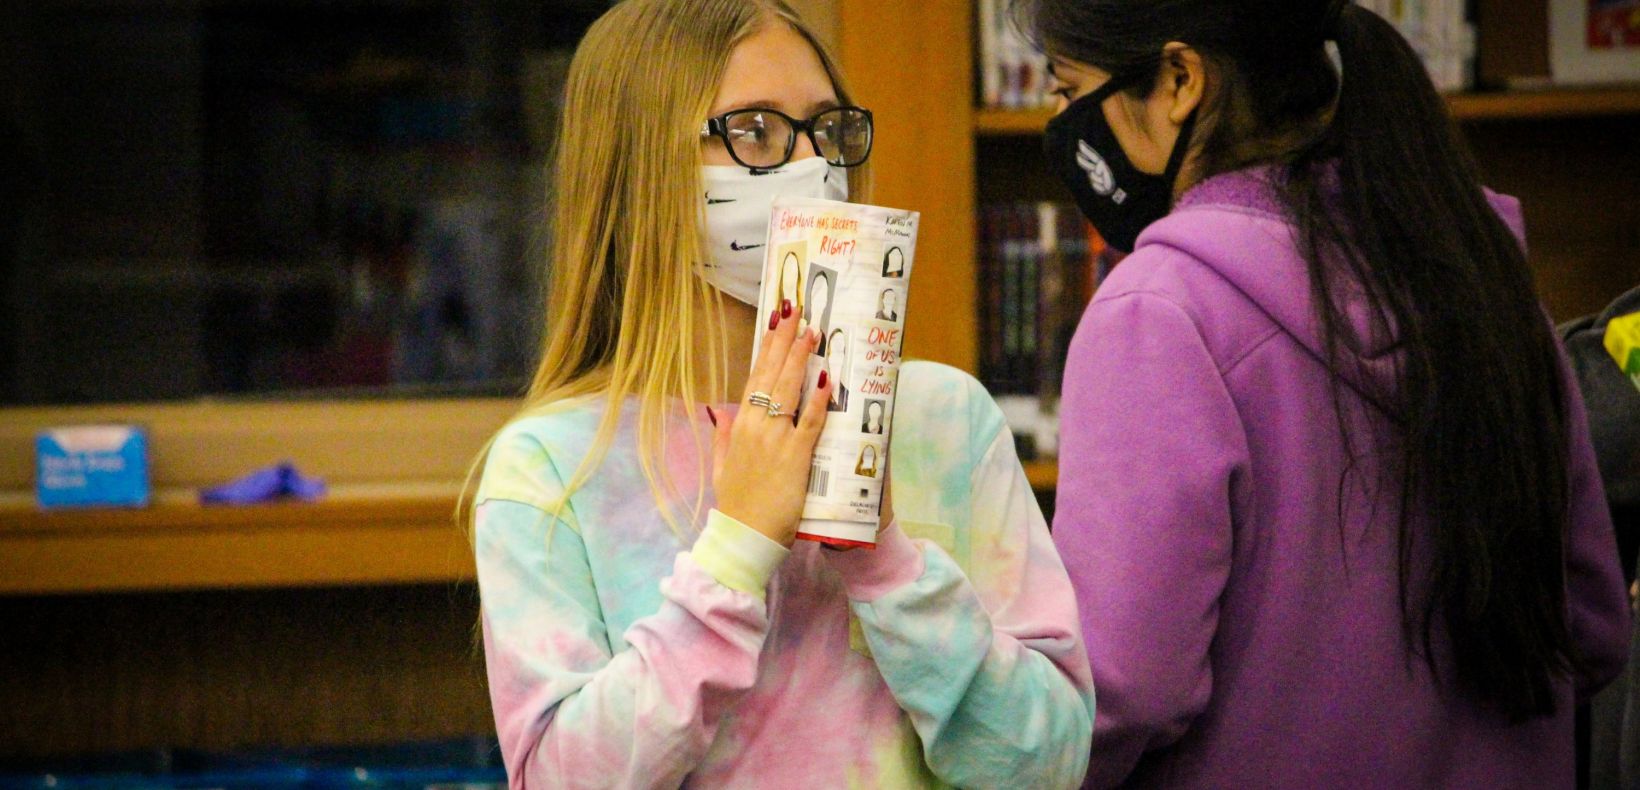 student holding a book